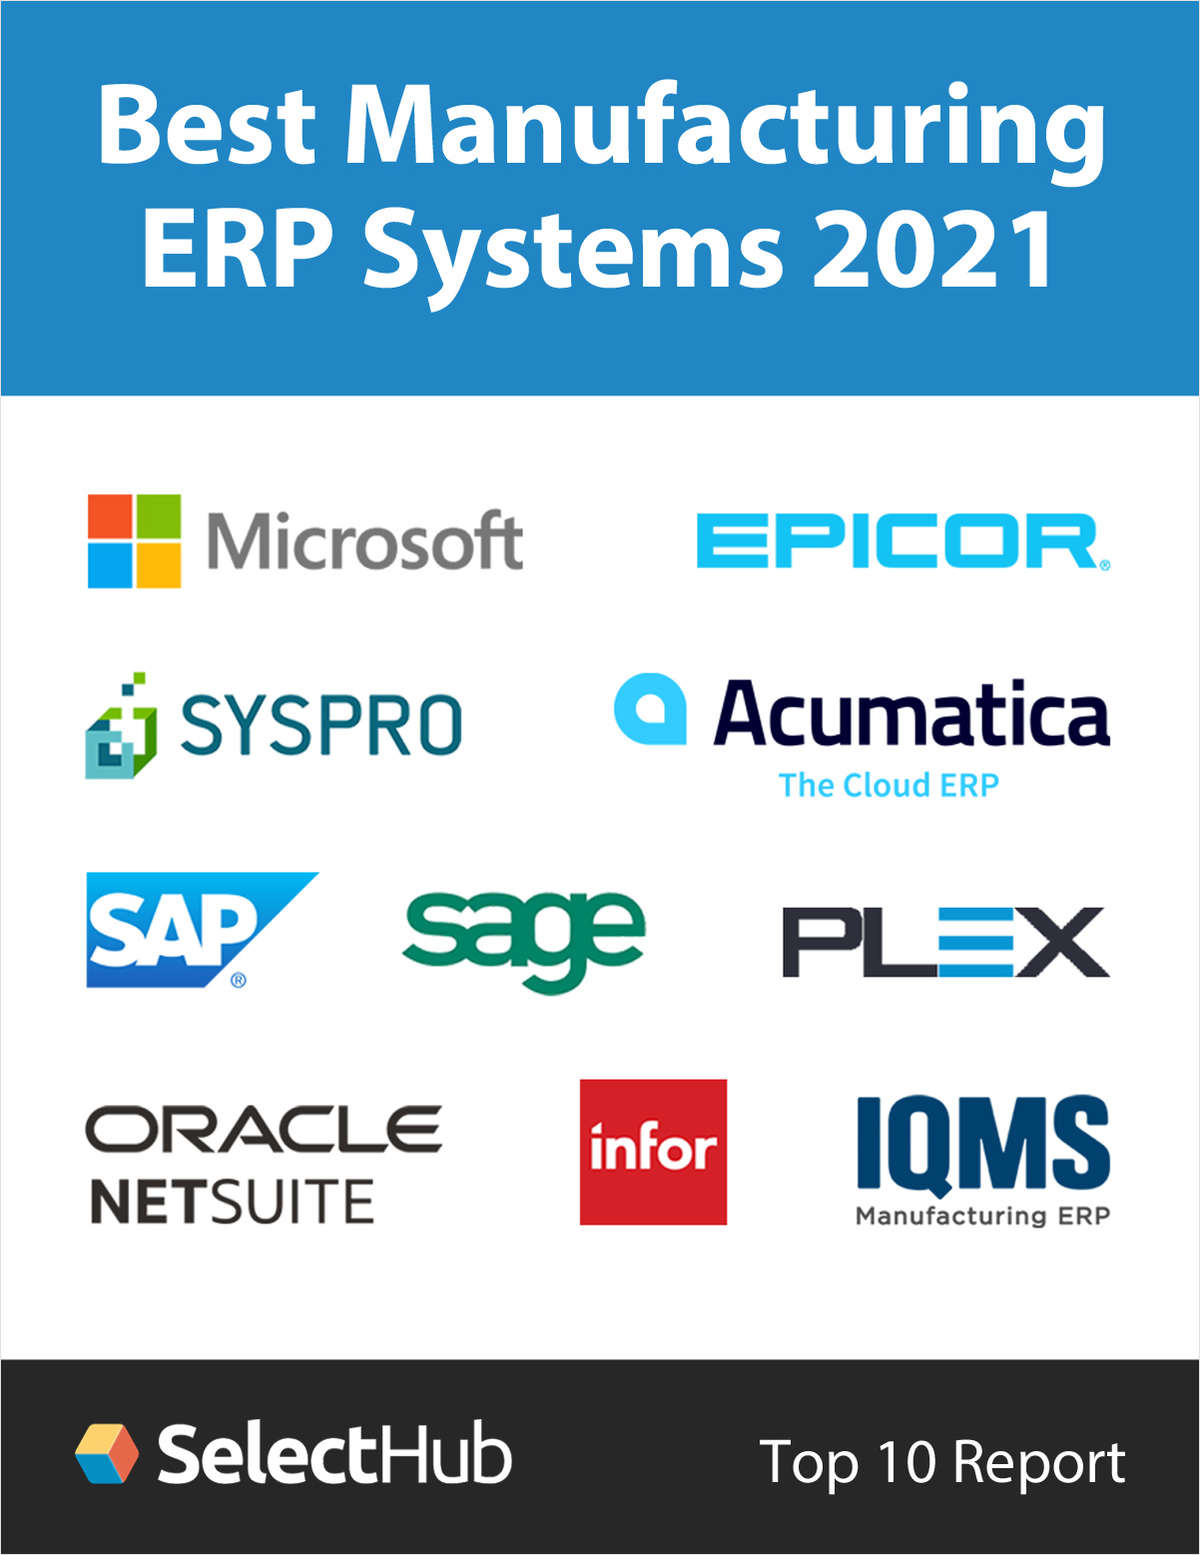 Best Manufacturing ERP Systems for 2021Top 10 Report, Free SelectHub